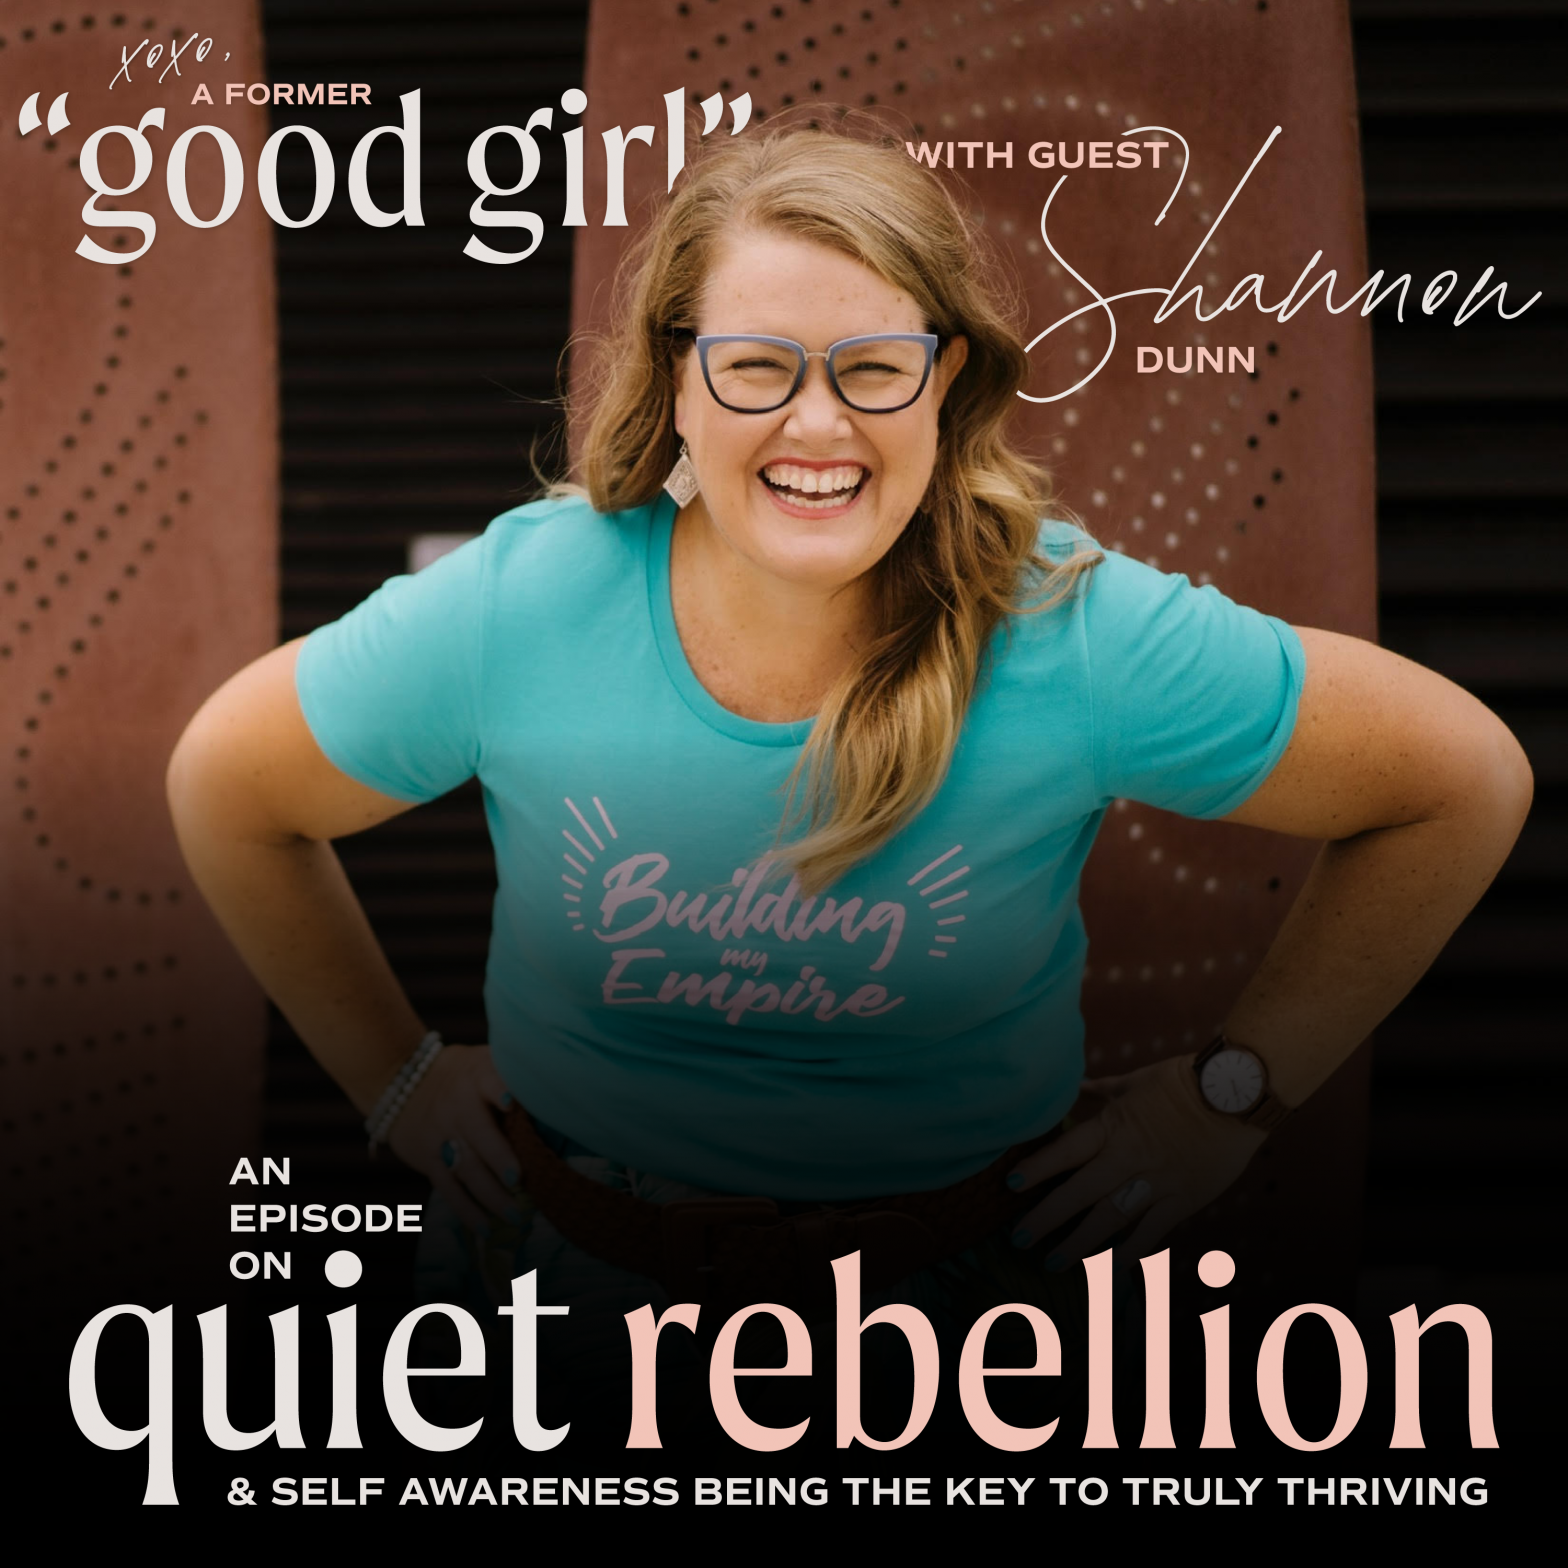 Shannon Dunn Quiet Rebel Thrive Factor Business Women Podcast Interview | xoxo A Former Good Girl Podcast